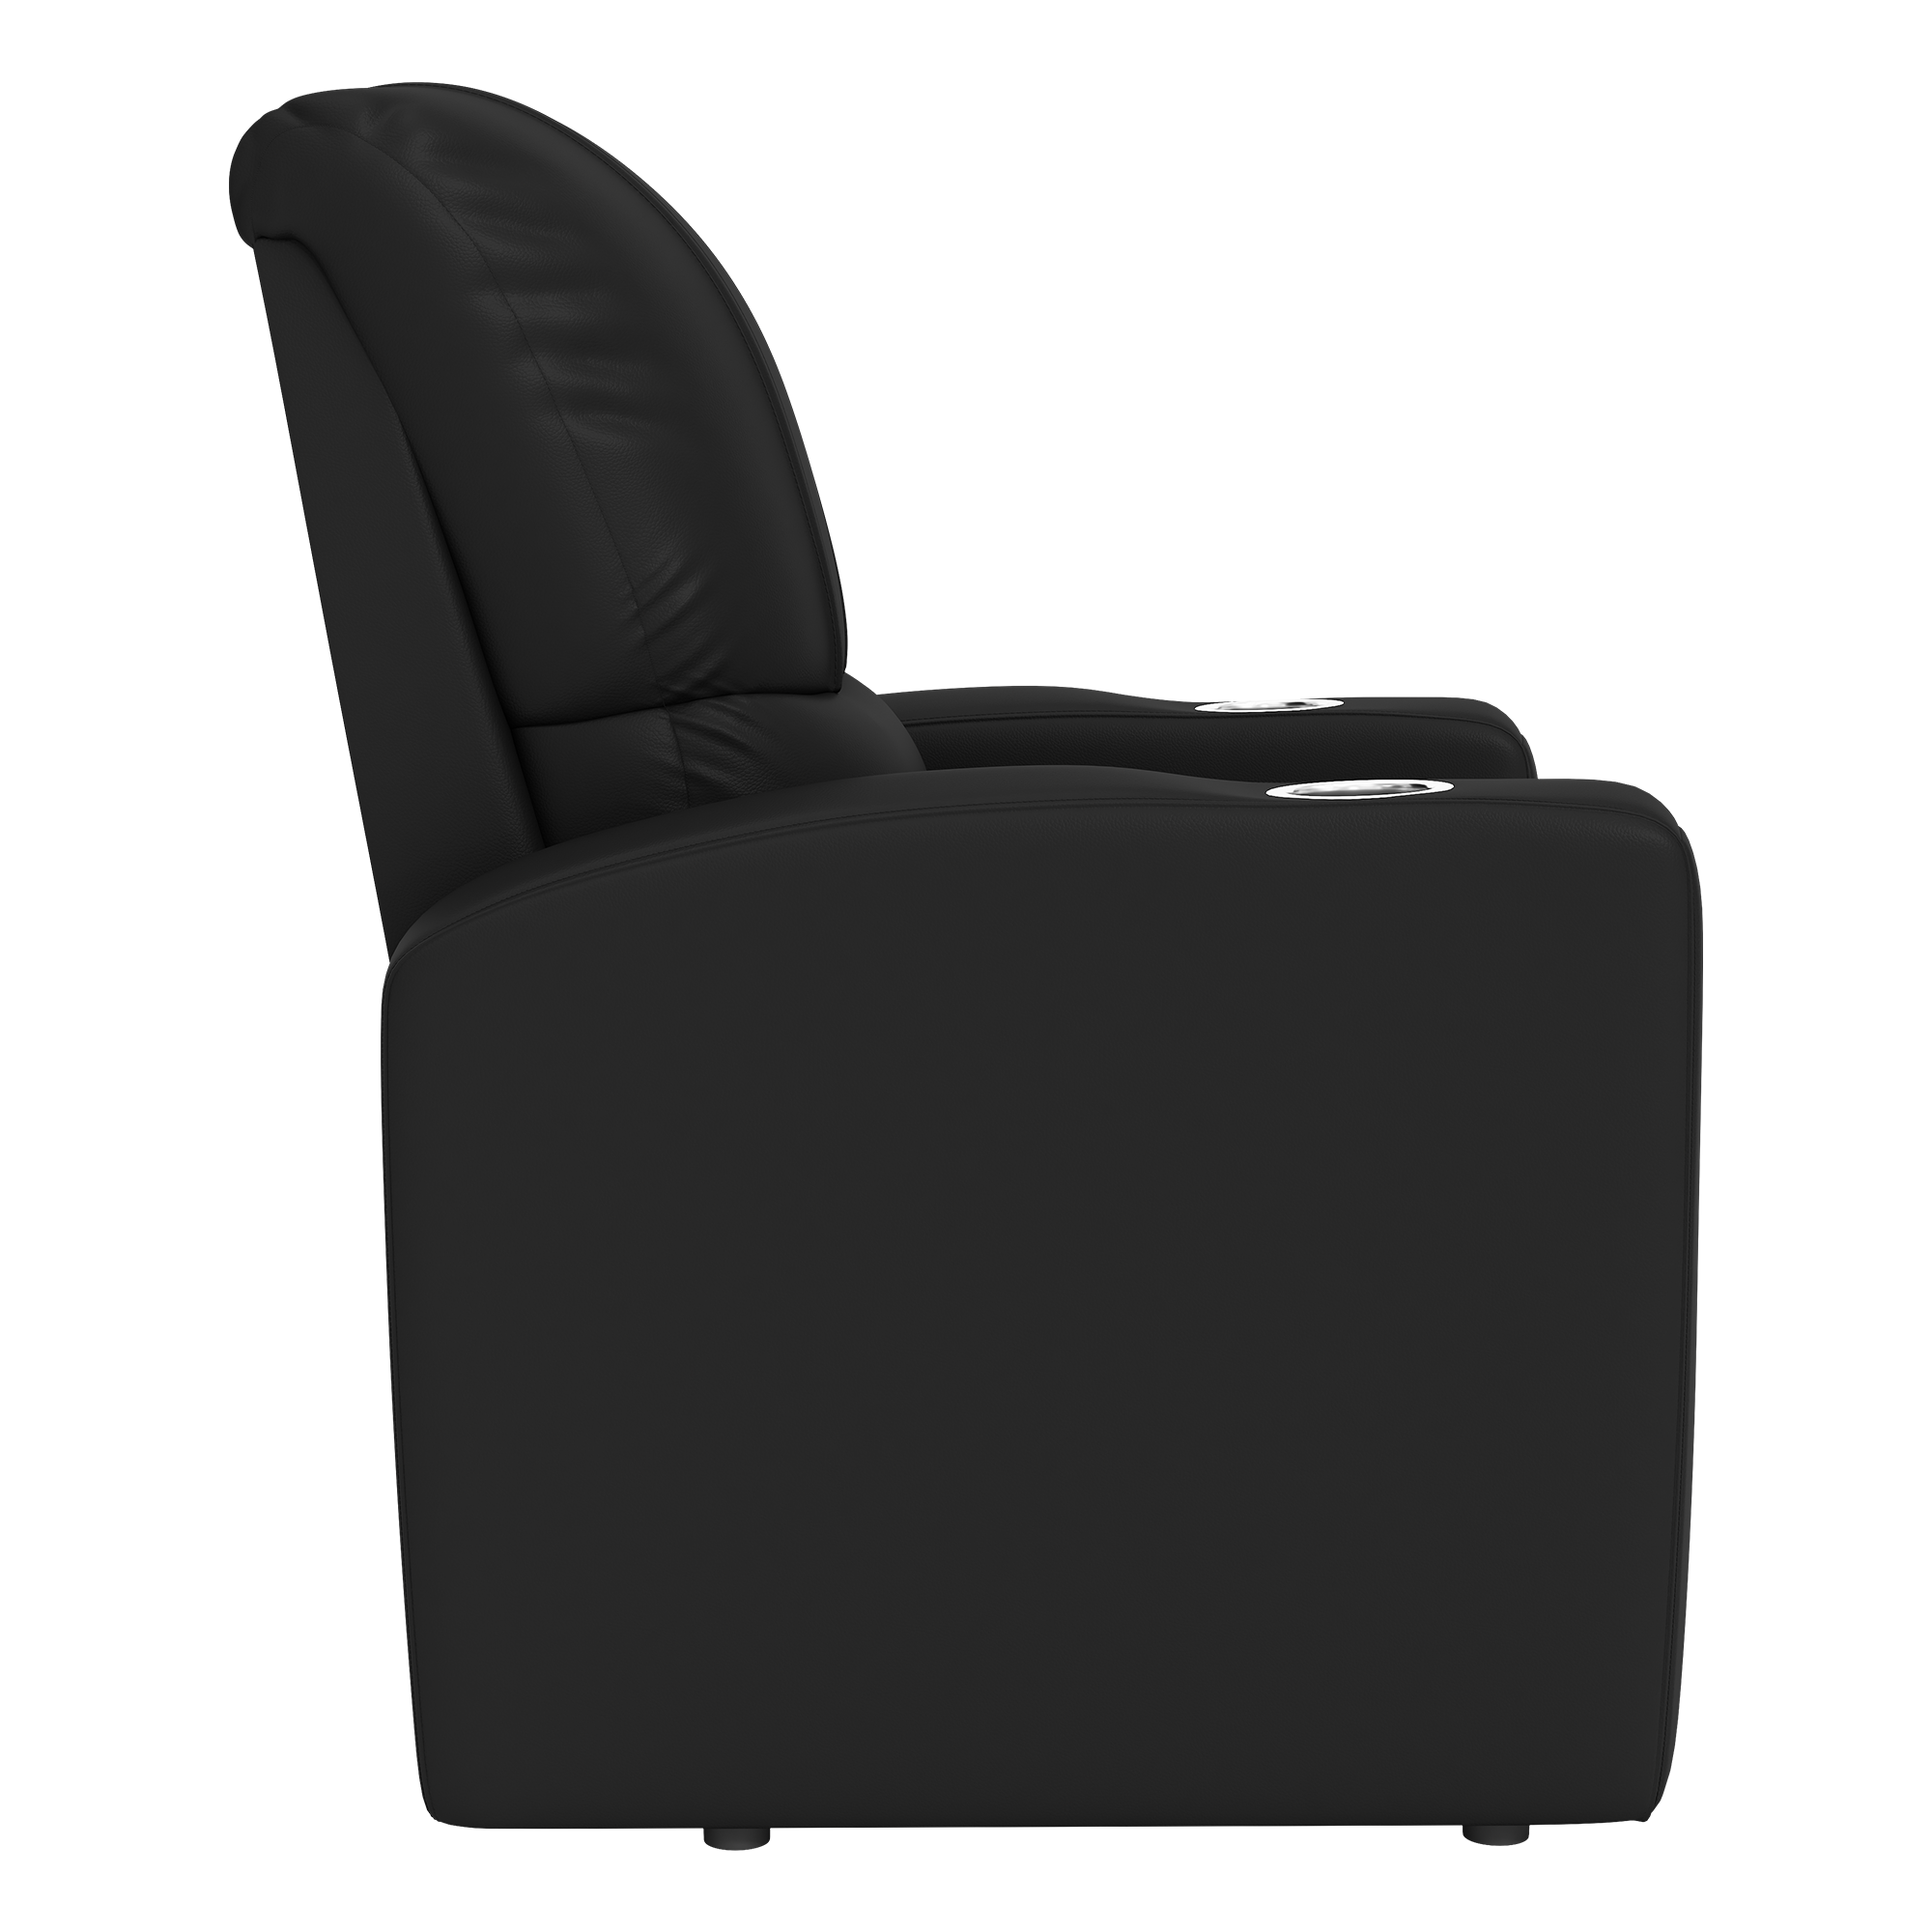 Stealth Recliner with Tampa Bay Rays Cooperstown Secondary